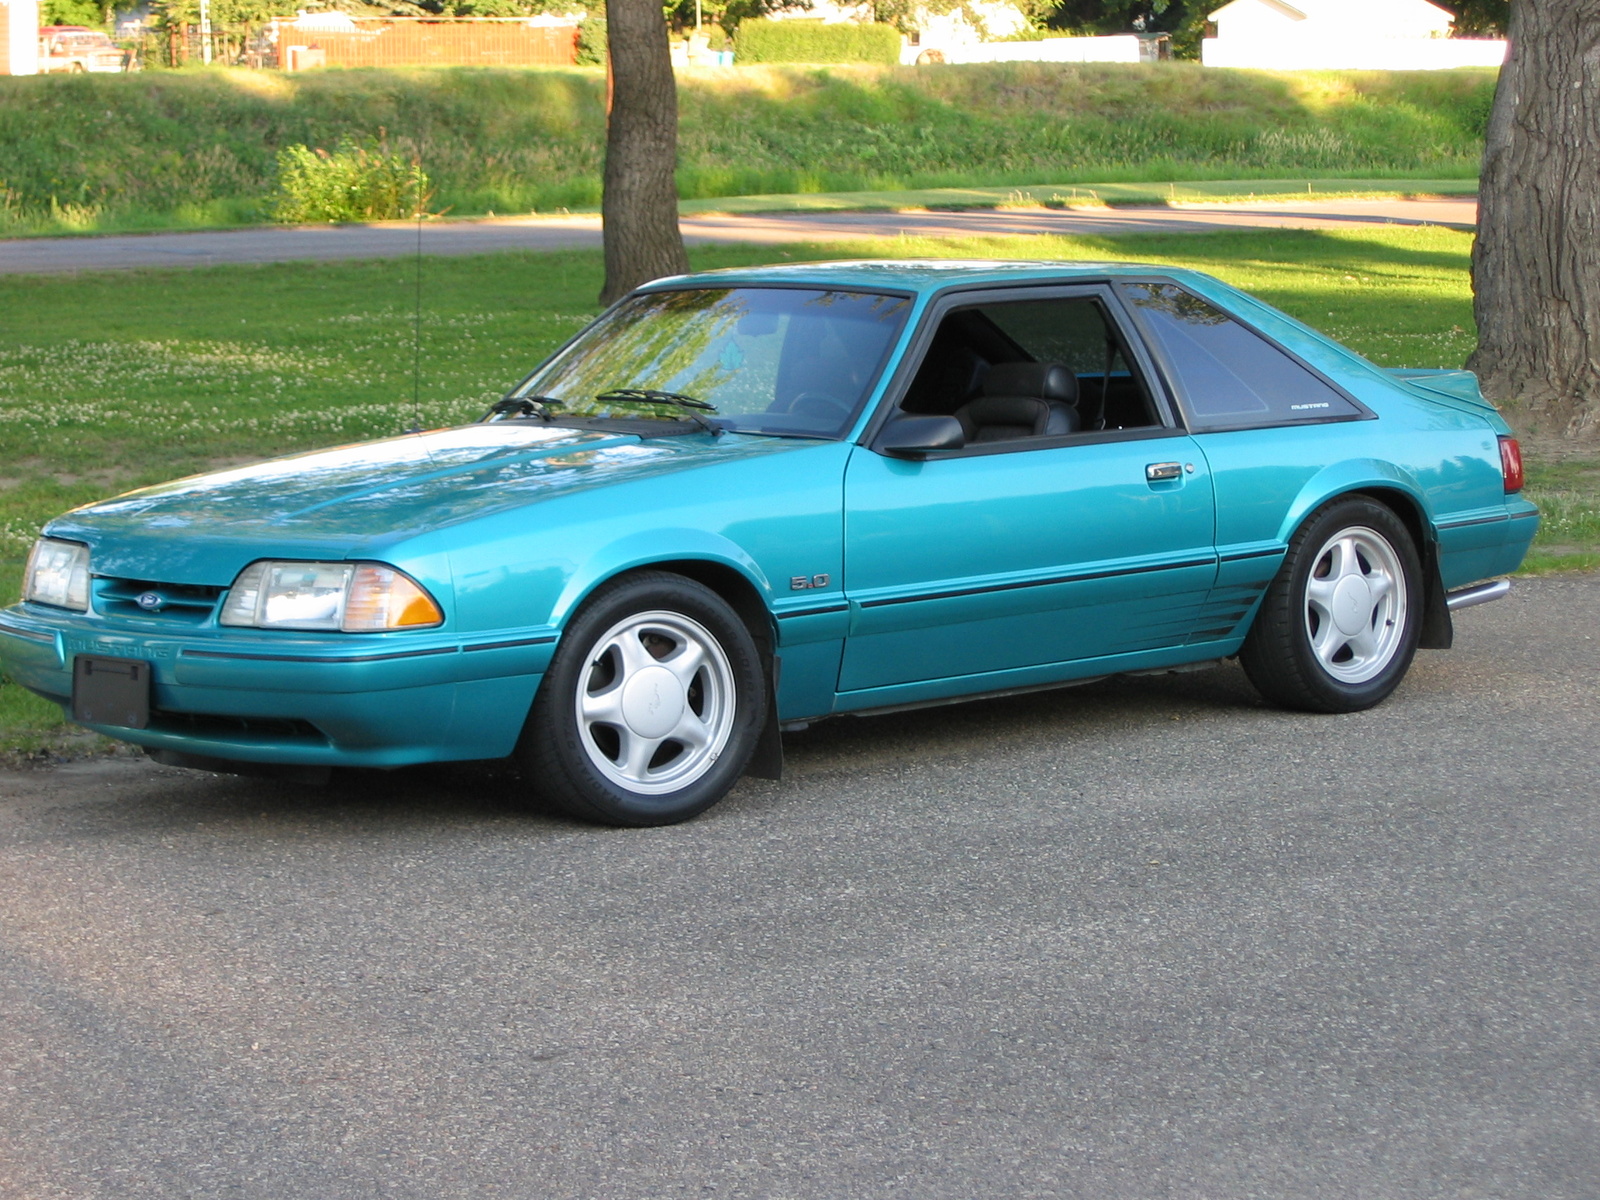 1992 Ford Mustang Backgrounds on Wallpapers Vista